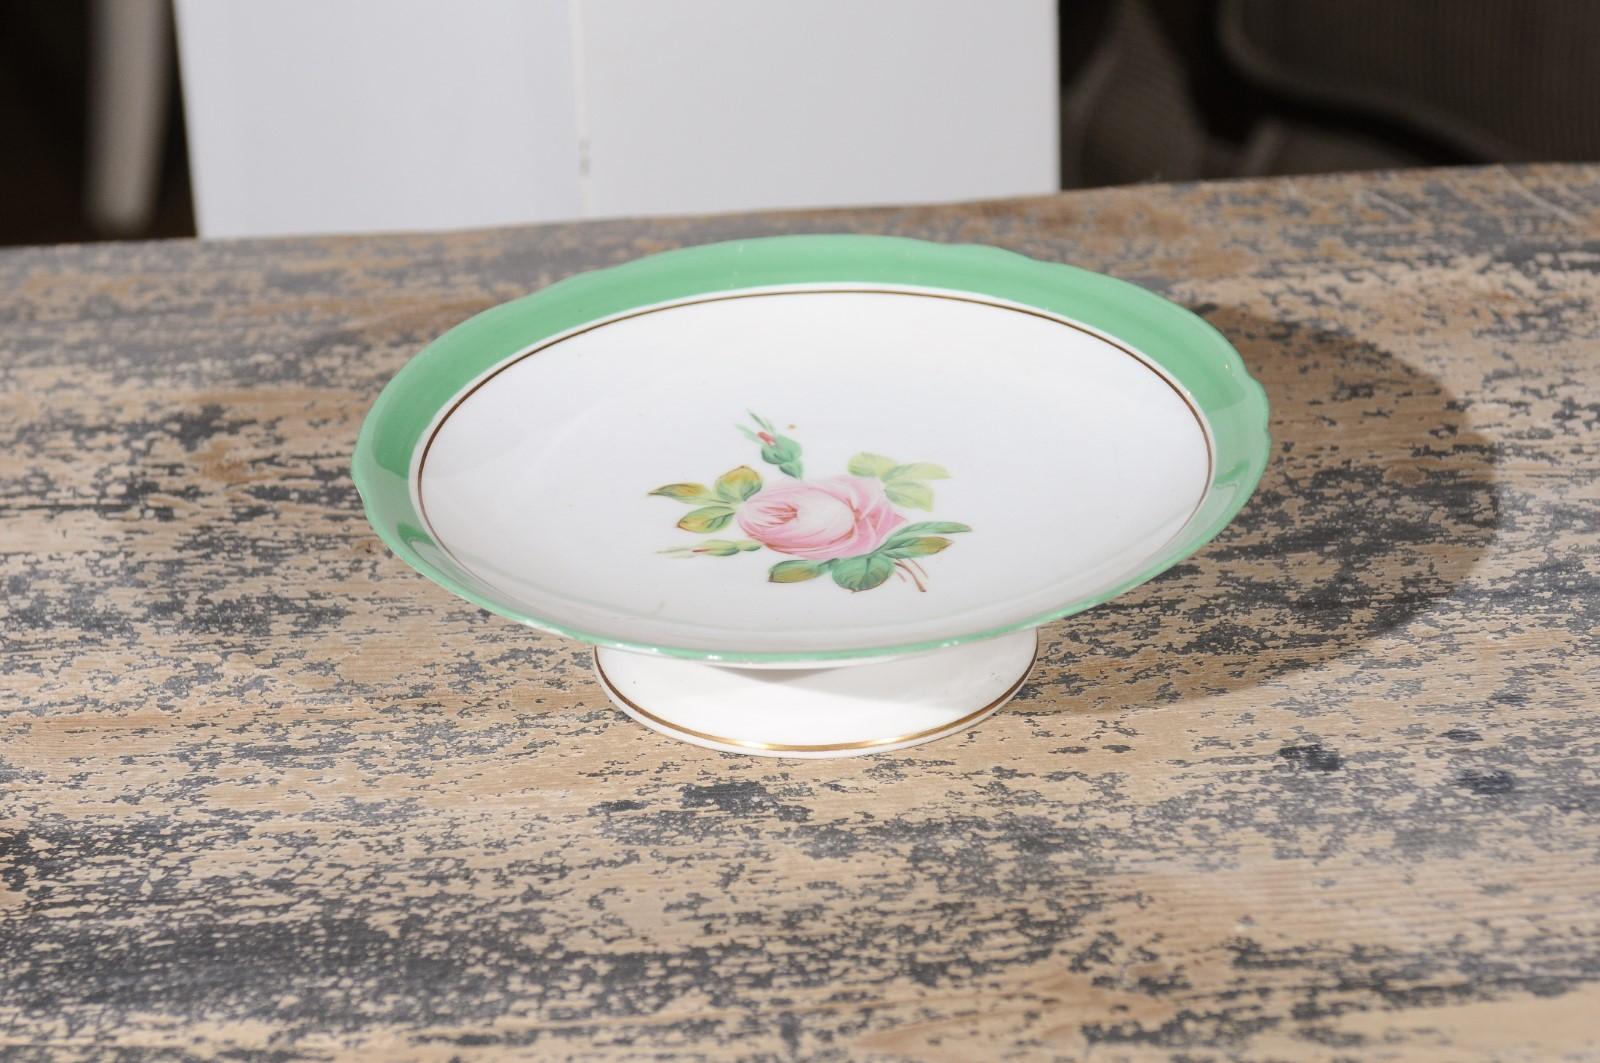 Faience English Victorian 1880s Floral Compote with Pink Roses, Green and Gold Trim